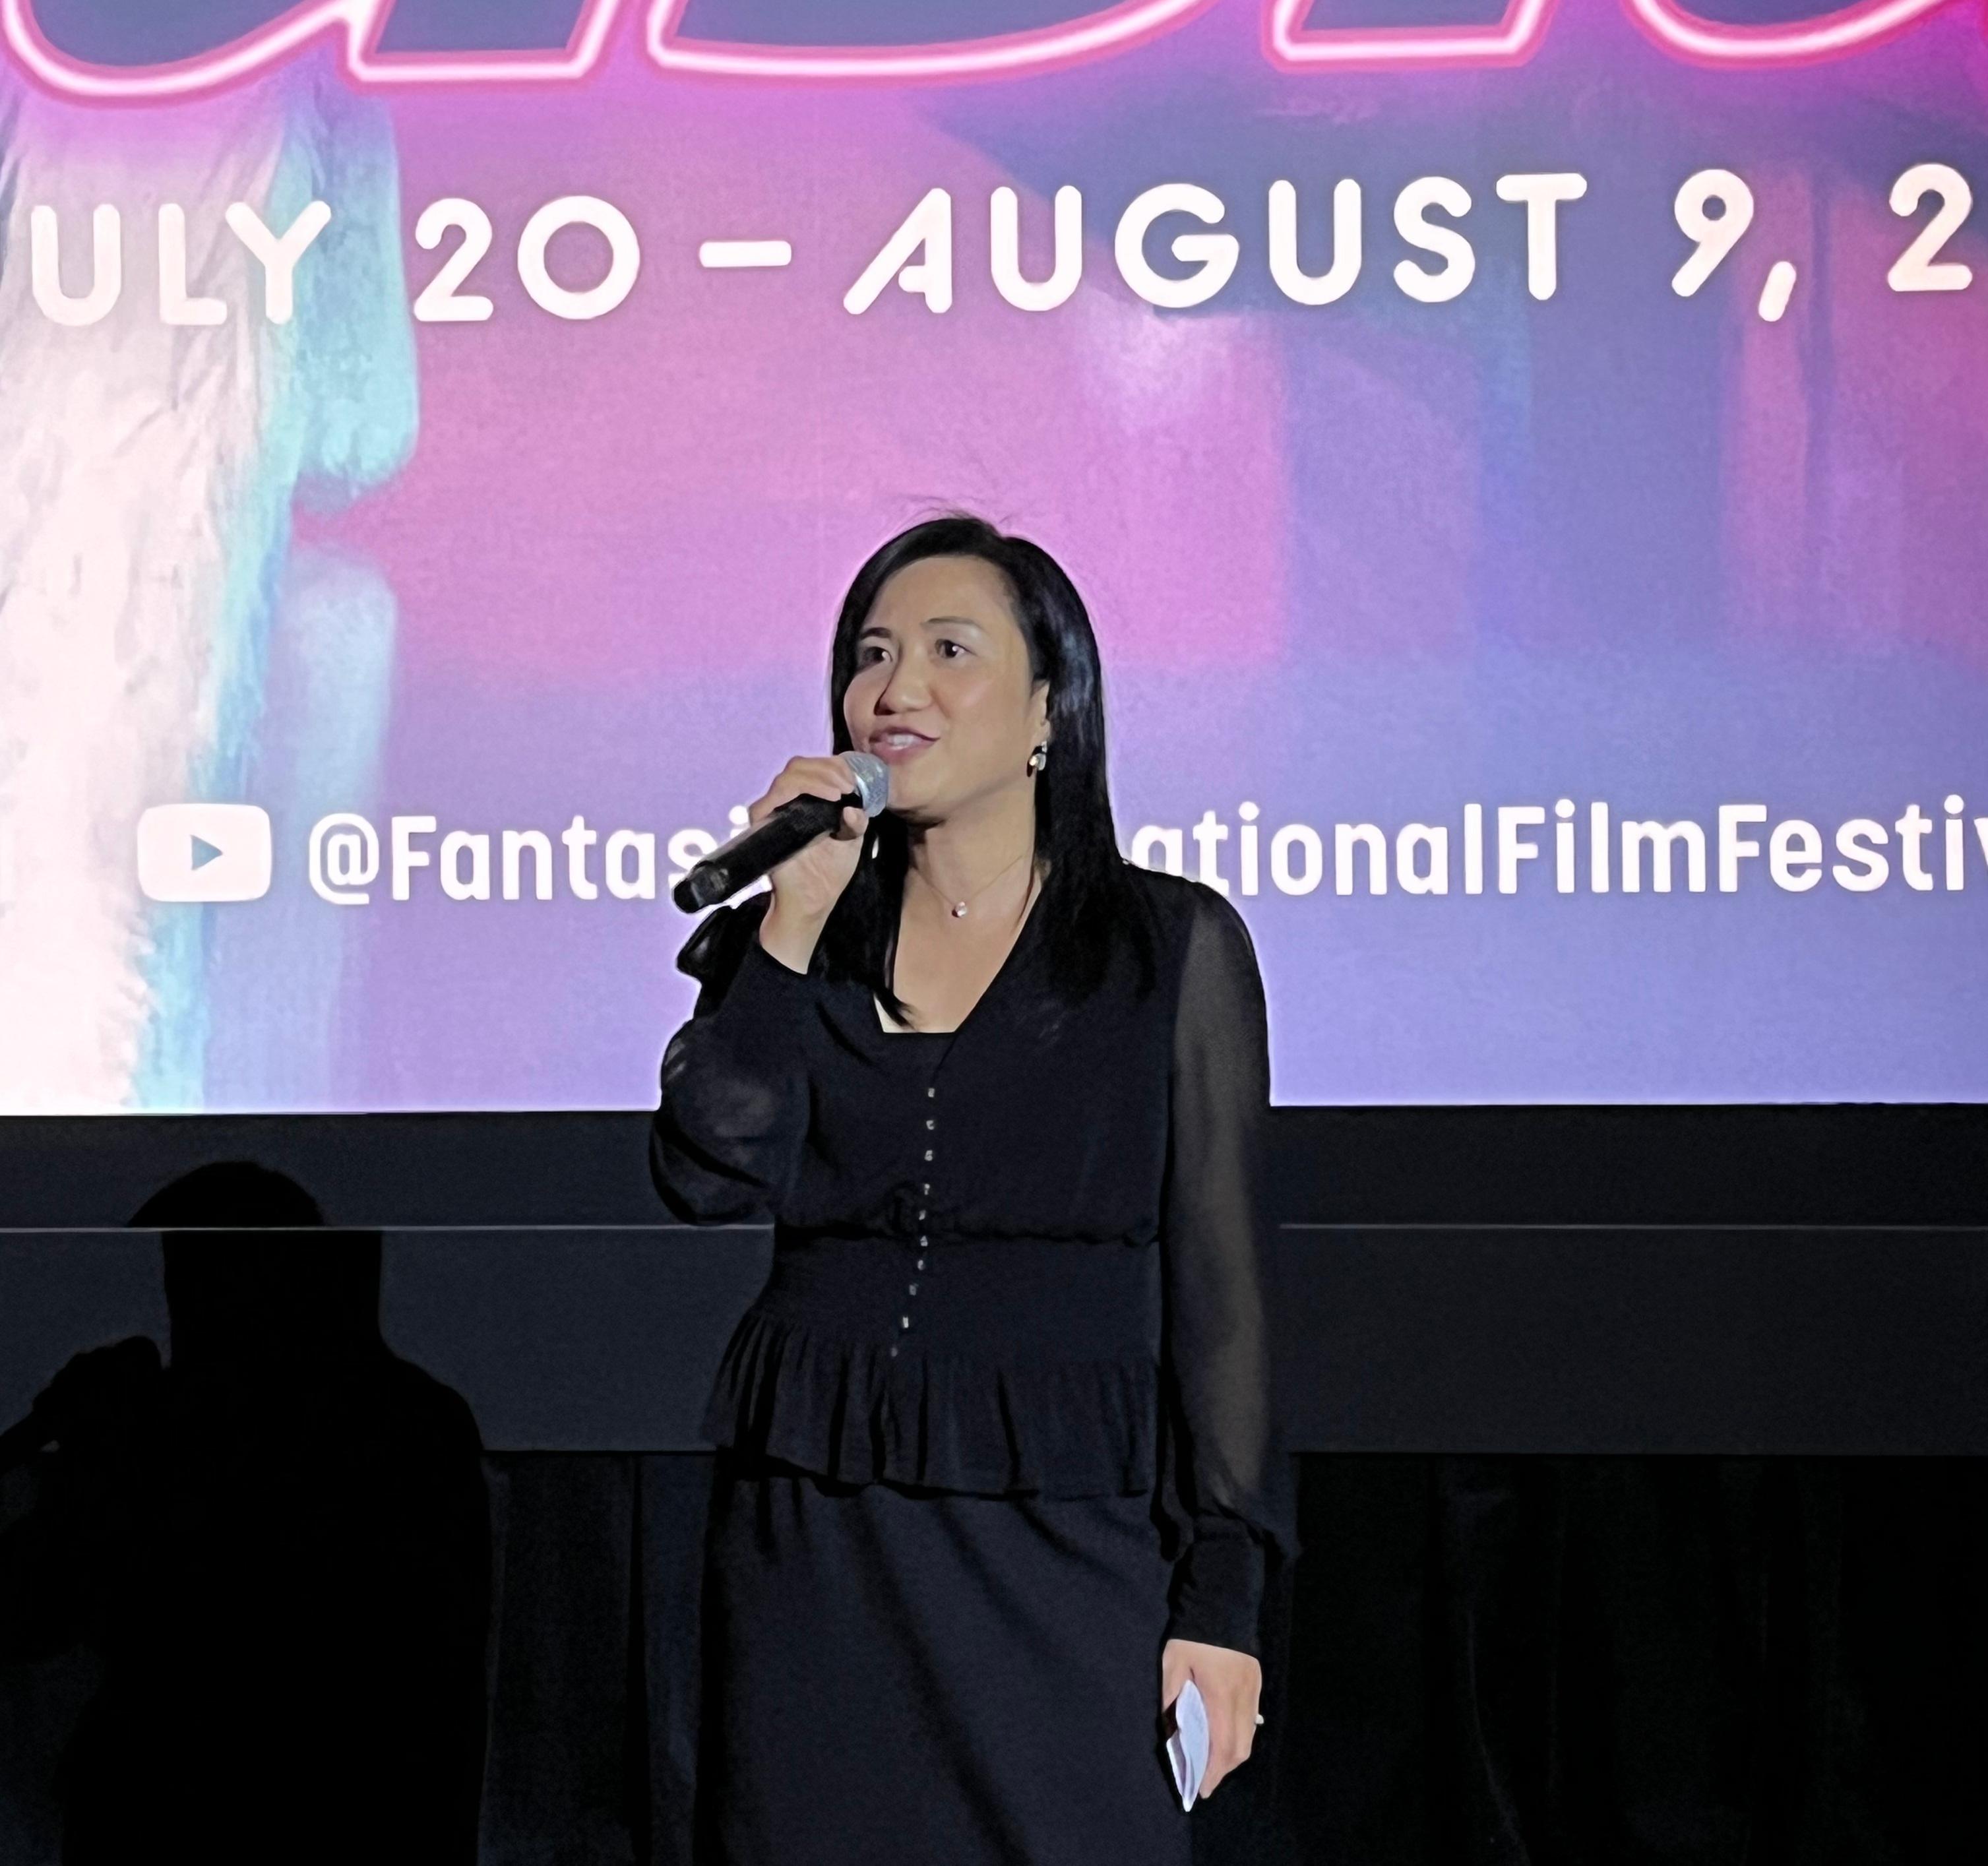 The Director of the Hong Kong Economic and Trade Office (Toronto), Ms Emily Mo, speaks before the screening of the movie "White Storm 3: Heaven or Hell", directed by Herman Yau, at Concordia Hall Theatre in Montreal, Canada, on July 20 (Montreal time).